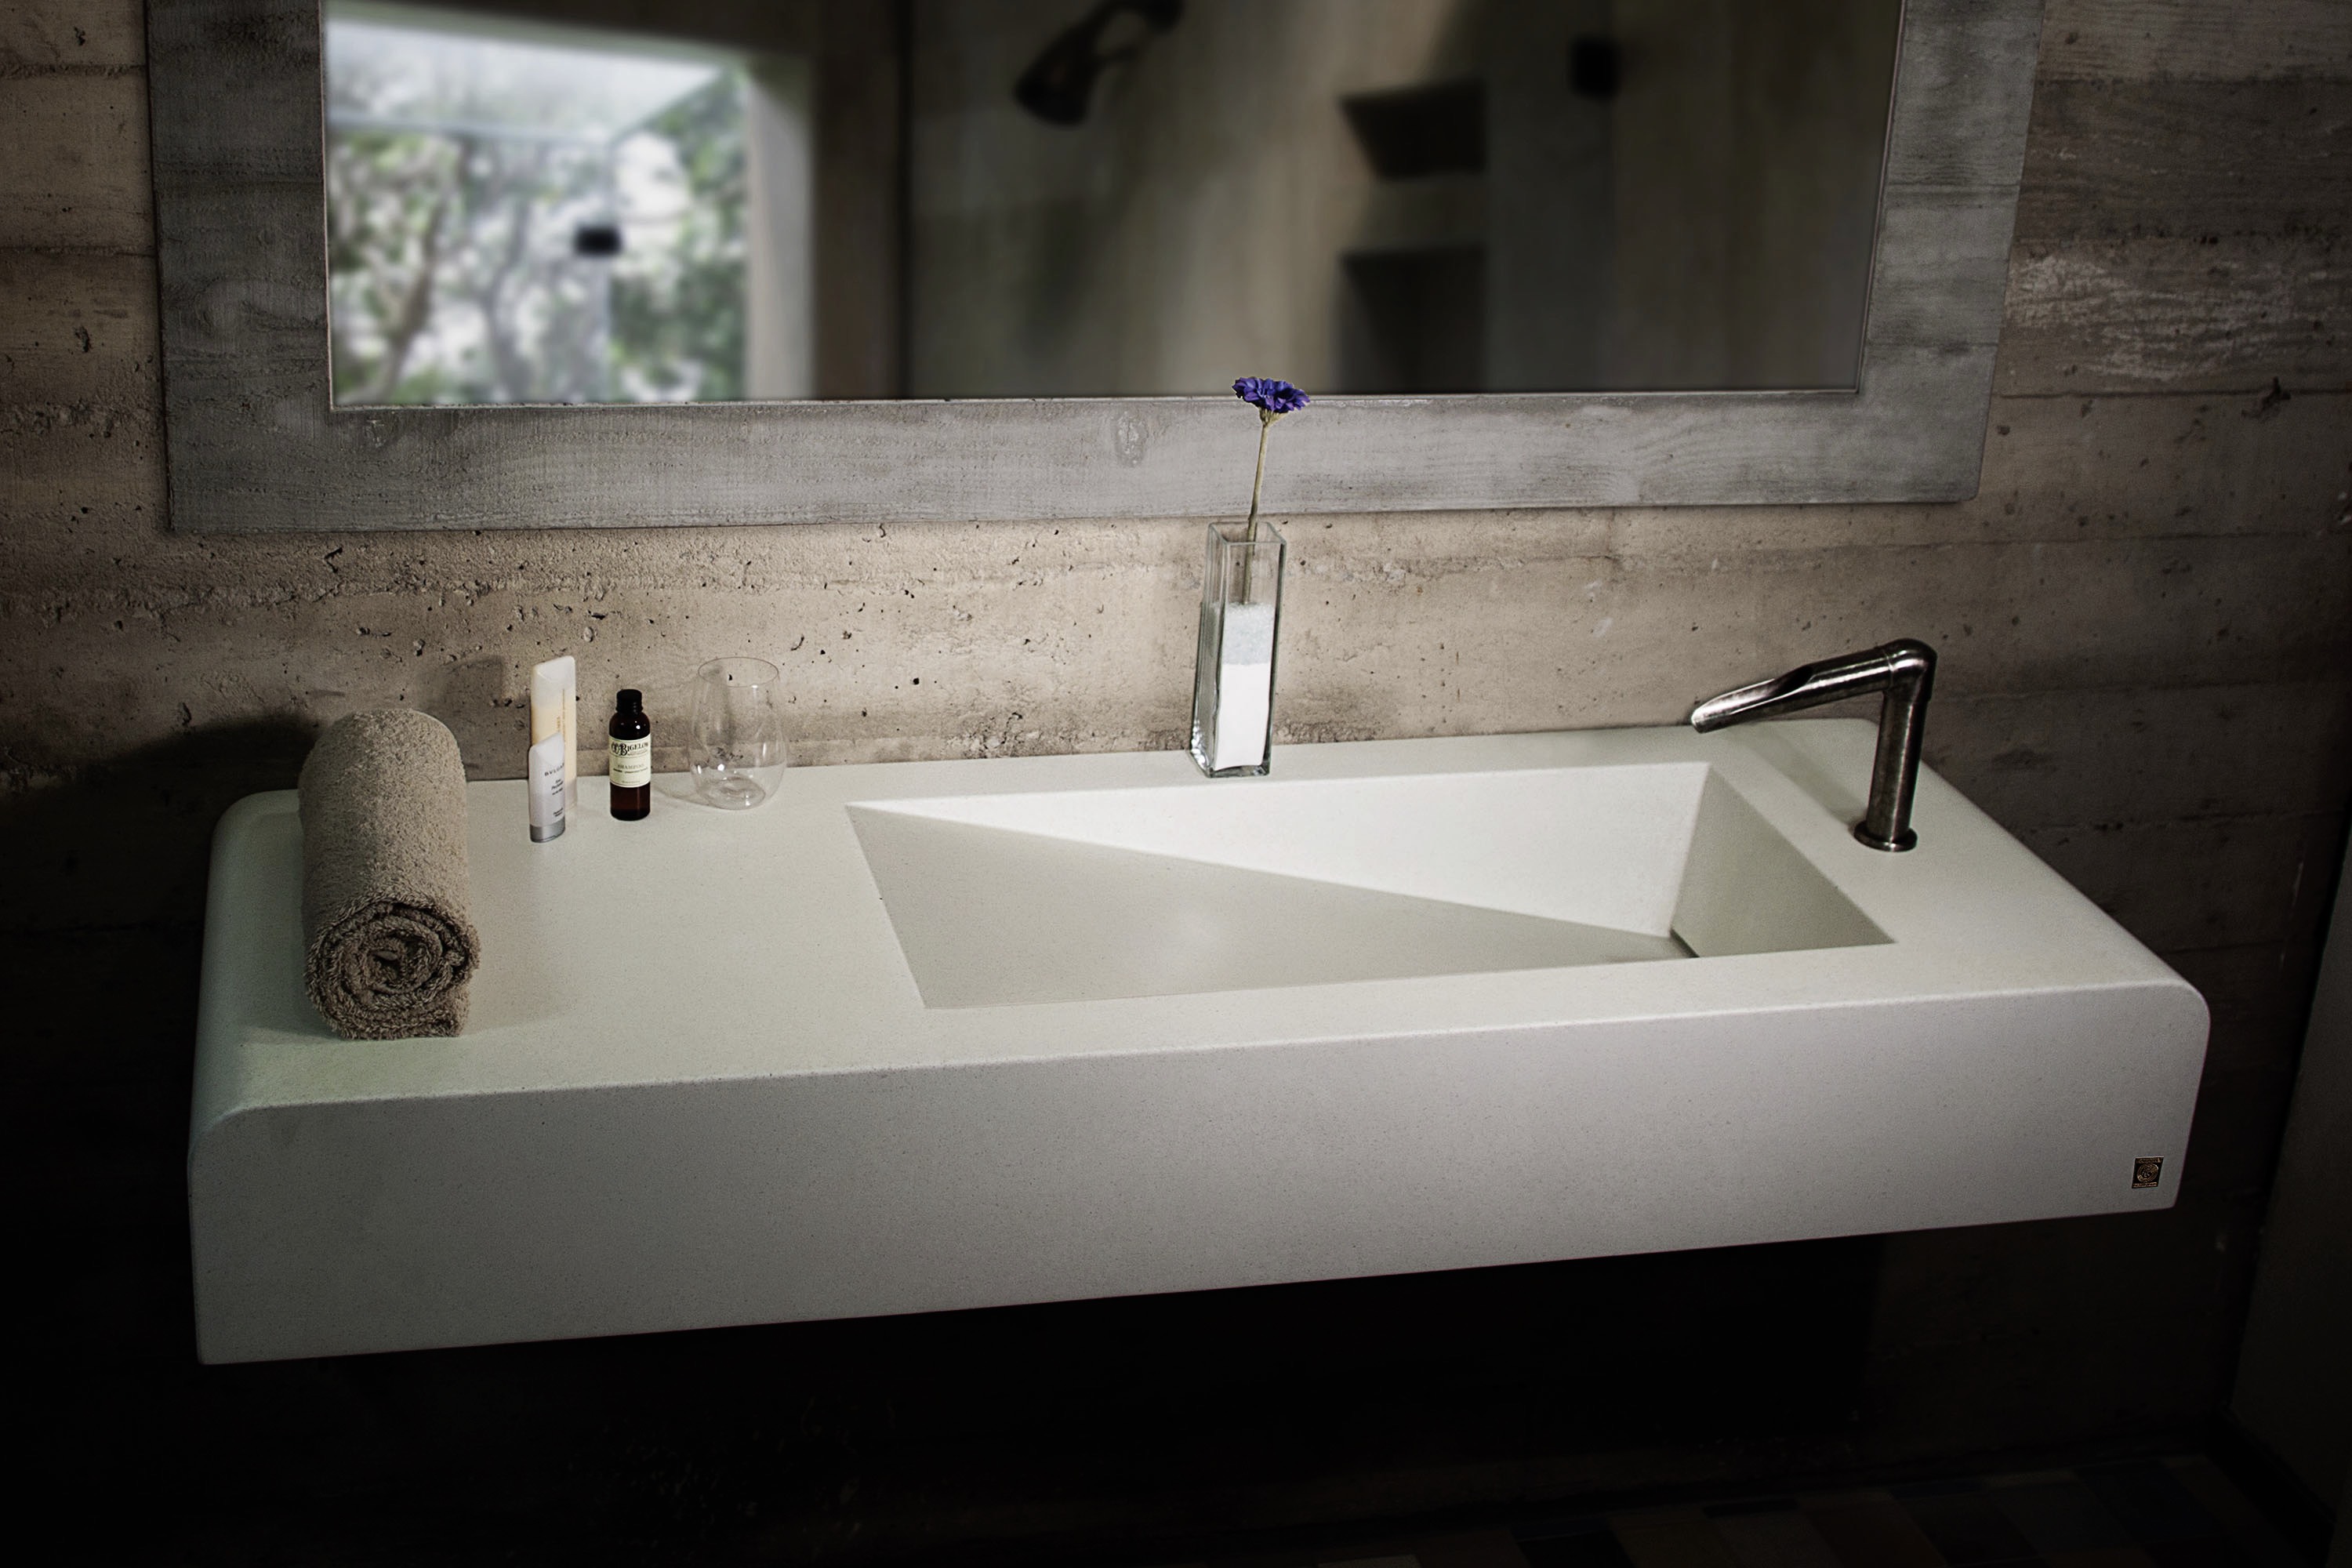 Concrete RampSink by Sonoma Cast Stone with SansHands Faucet by Sonoma Forge, N604 Alabaster